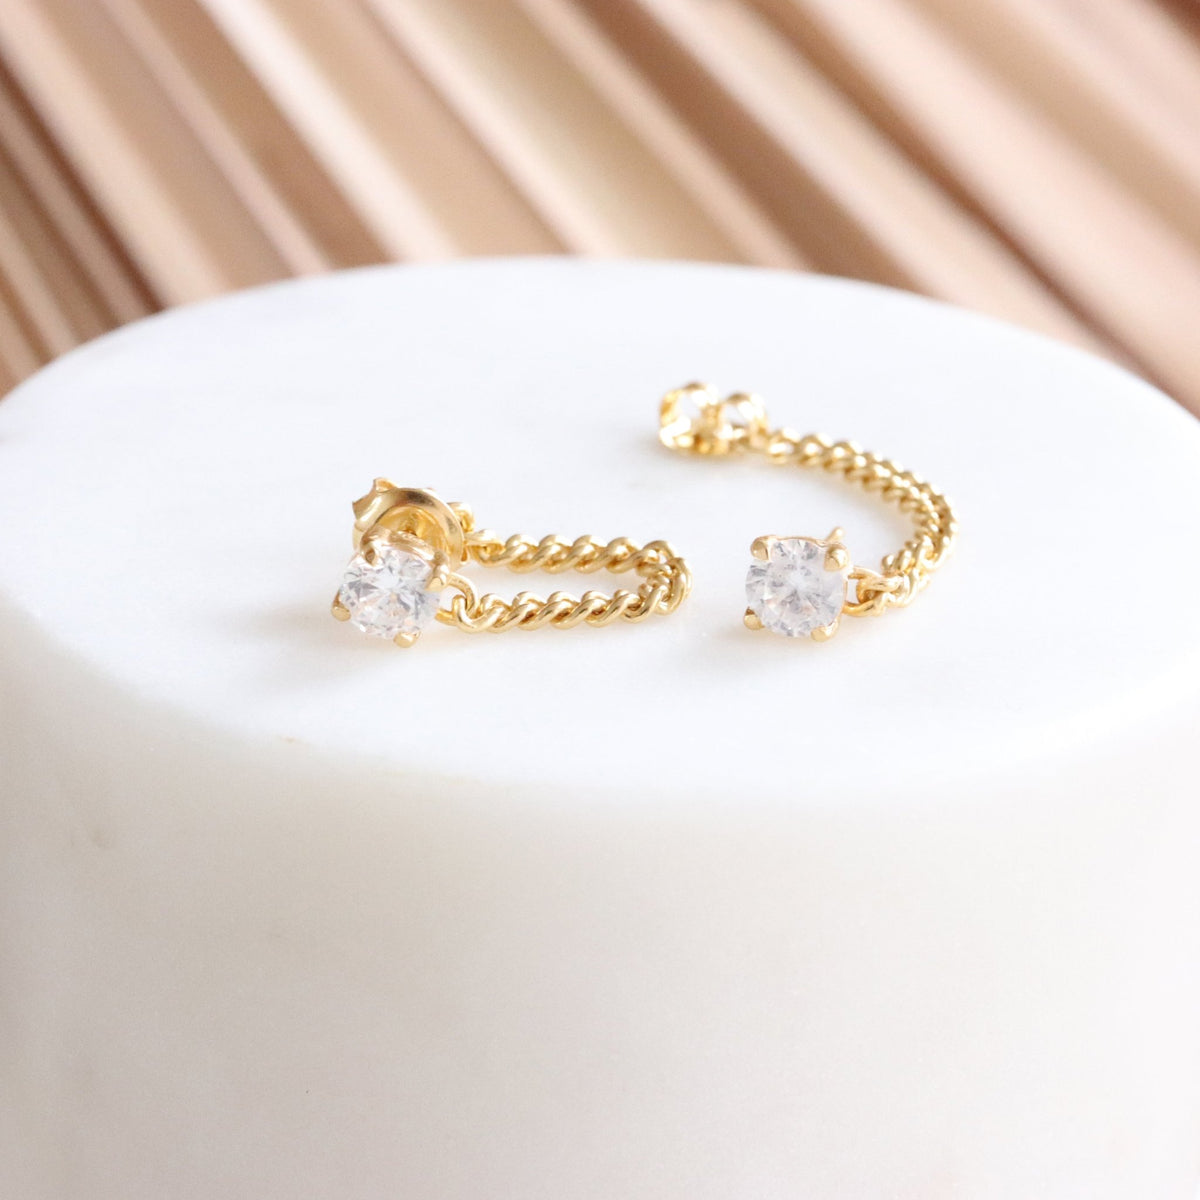 LOVE CABLE LINK CHAIN EARRINGS - CUBIC ZIRCONIA &amp; GOLD - SO PRETTY CARA COTTER